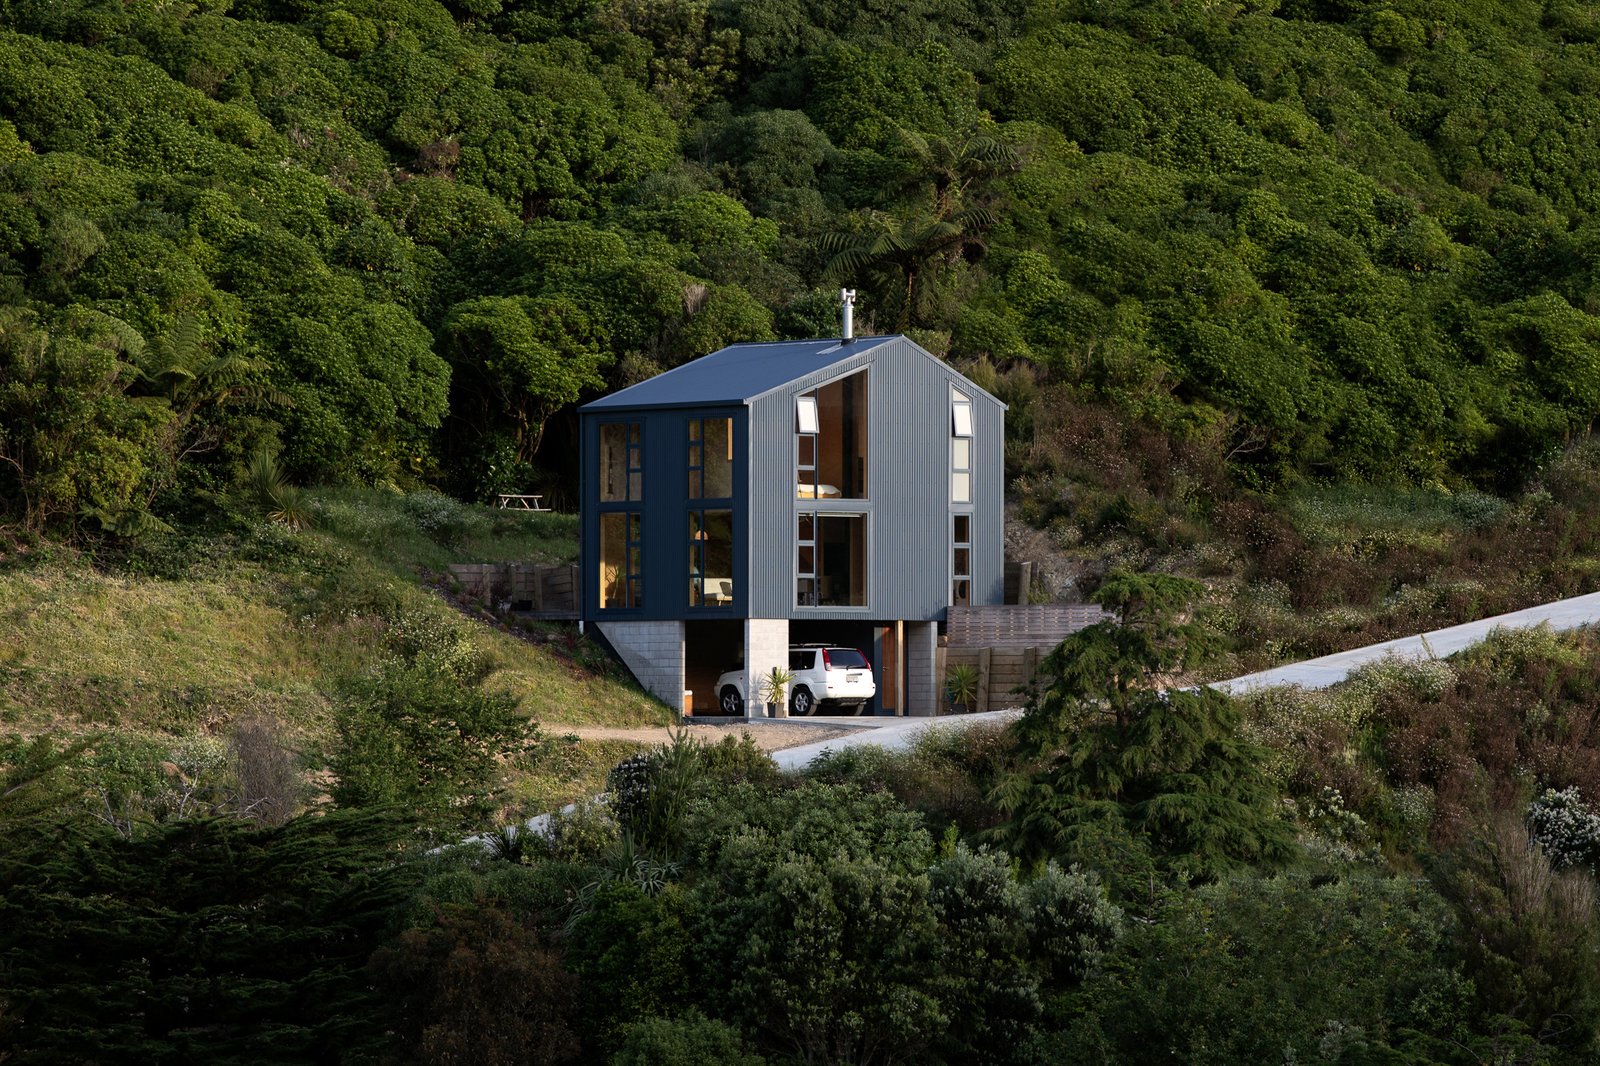 The Thornton House sits on a steep site in Brooklyn, Wellington, New Zealand, with a small footprint of just 50 square meters.